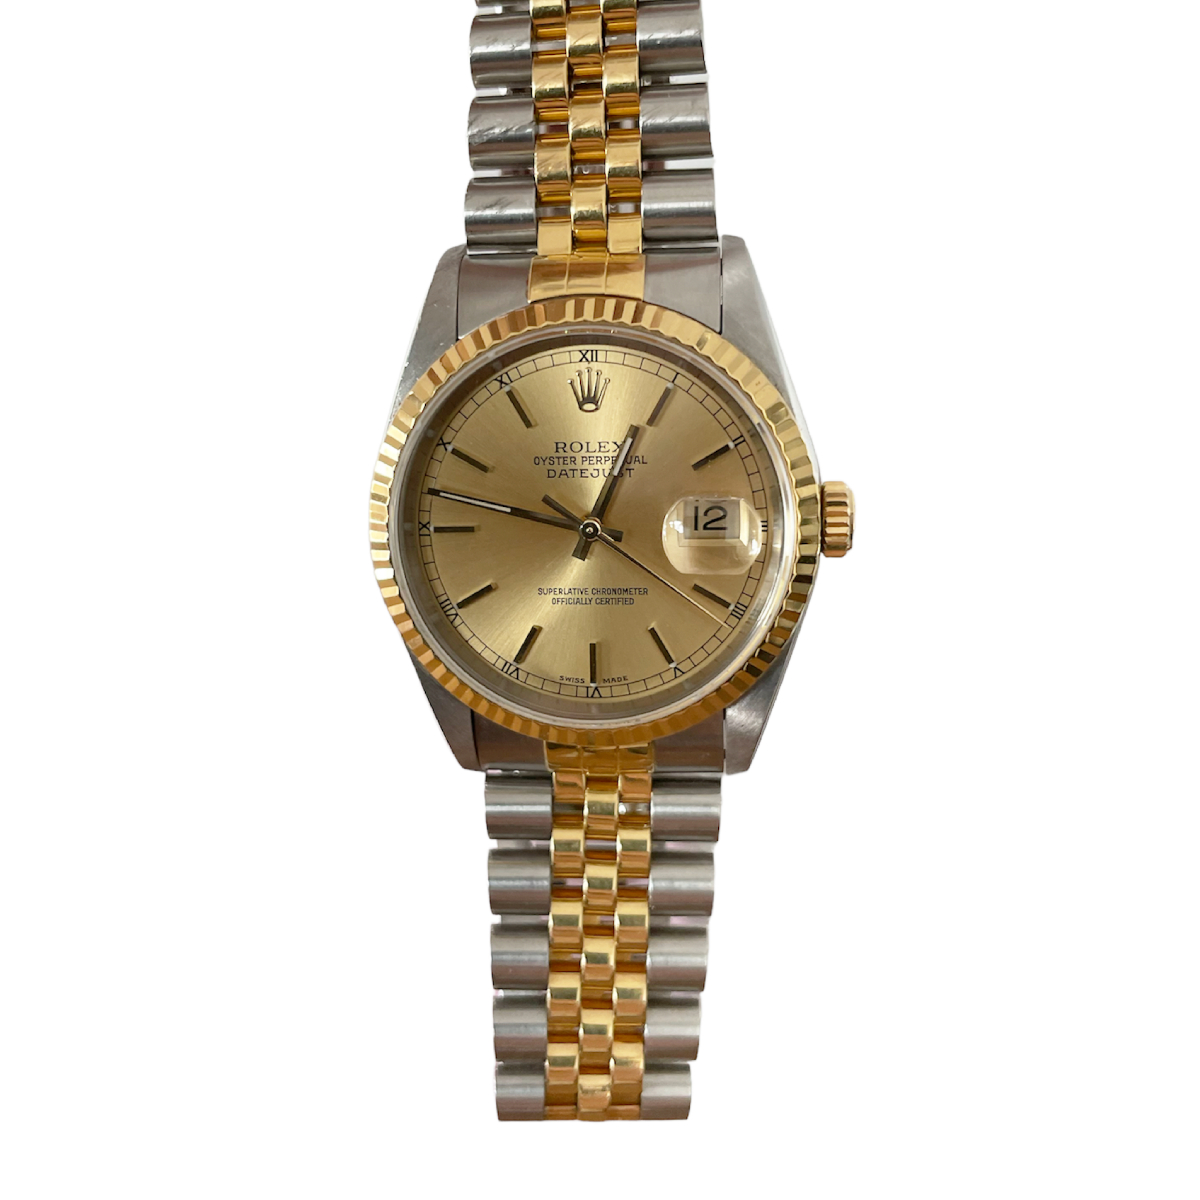 Rolex 16233 Datejust Champagne dial watch 1995 - 222006